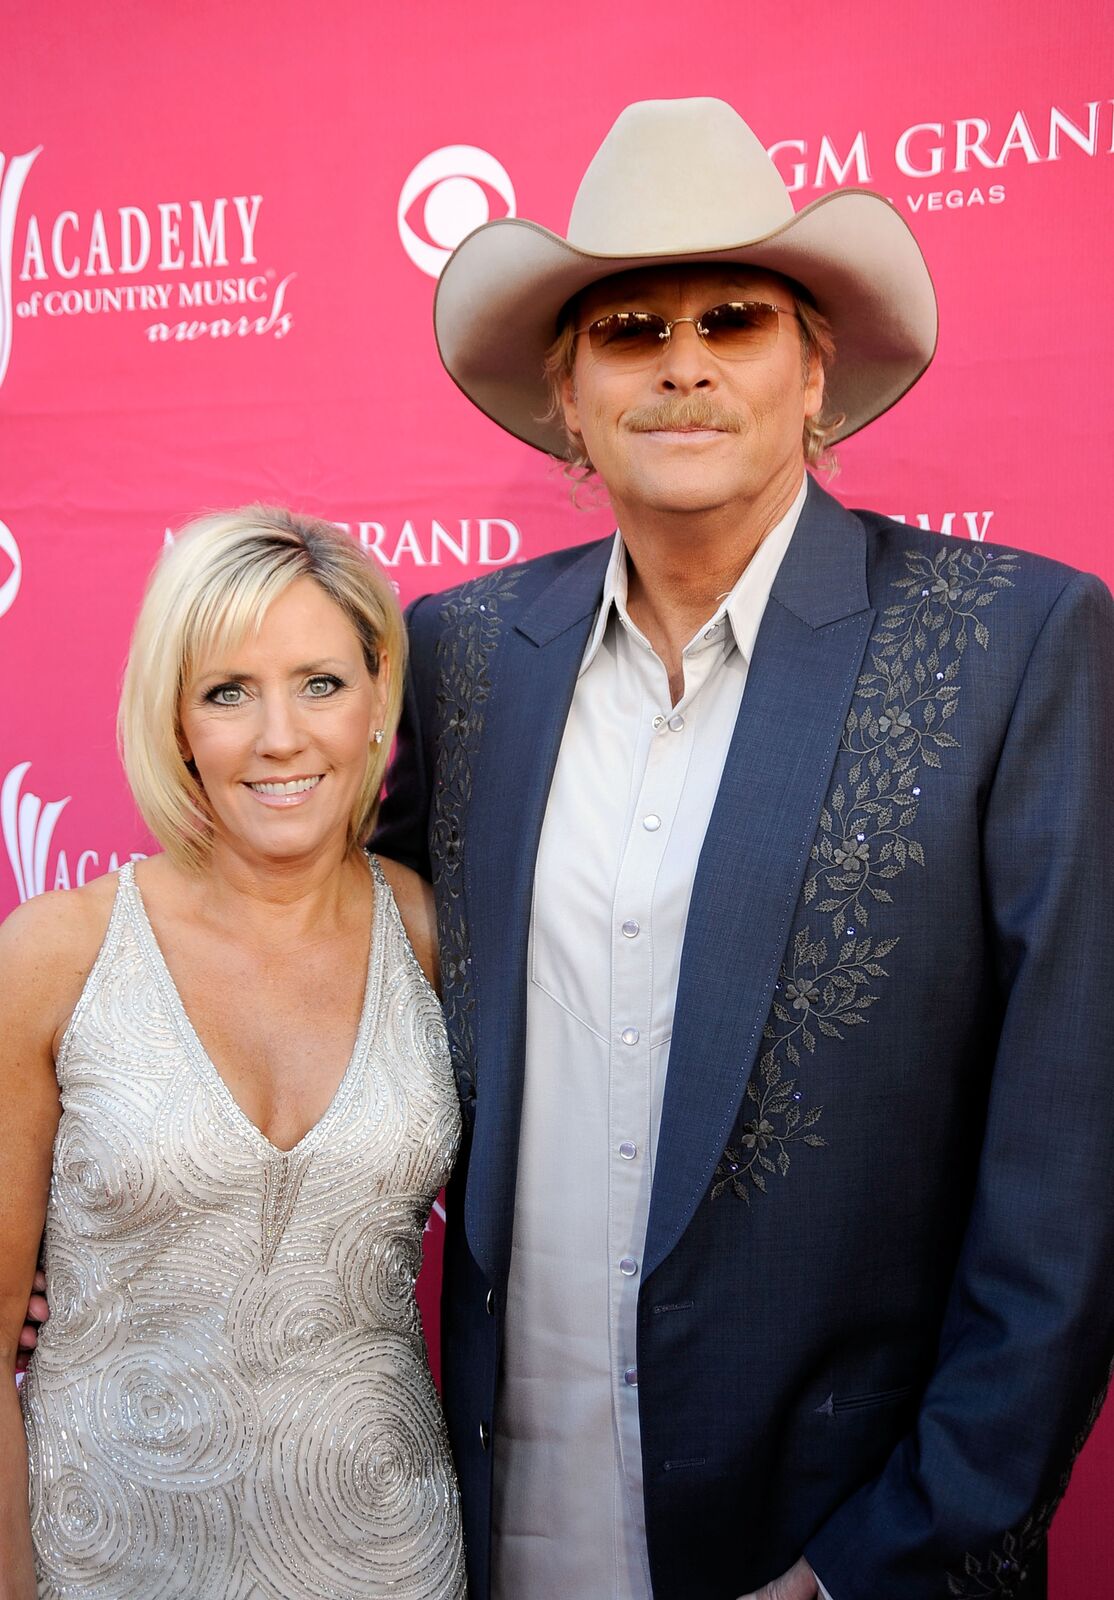 Denise Jackson and musician Alan Jackson arrives on the red carpet at the 44th annual Academy Of Country Music Awards held at the MGM Grand on April 5, 2009 in Las Vegas, Nevada | Photo: Getty Images